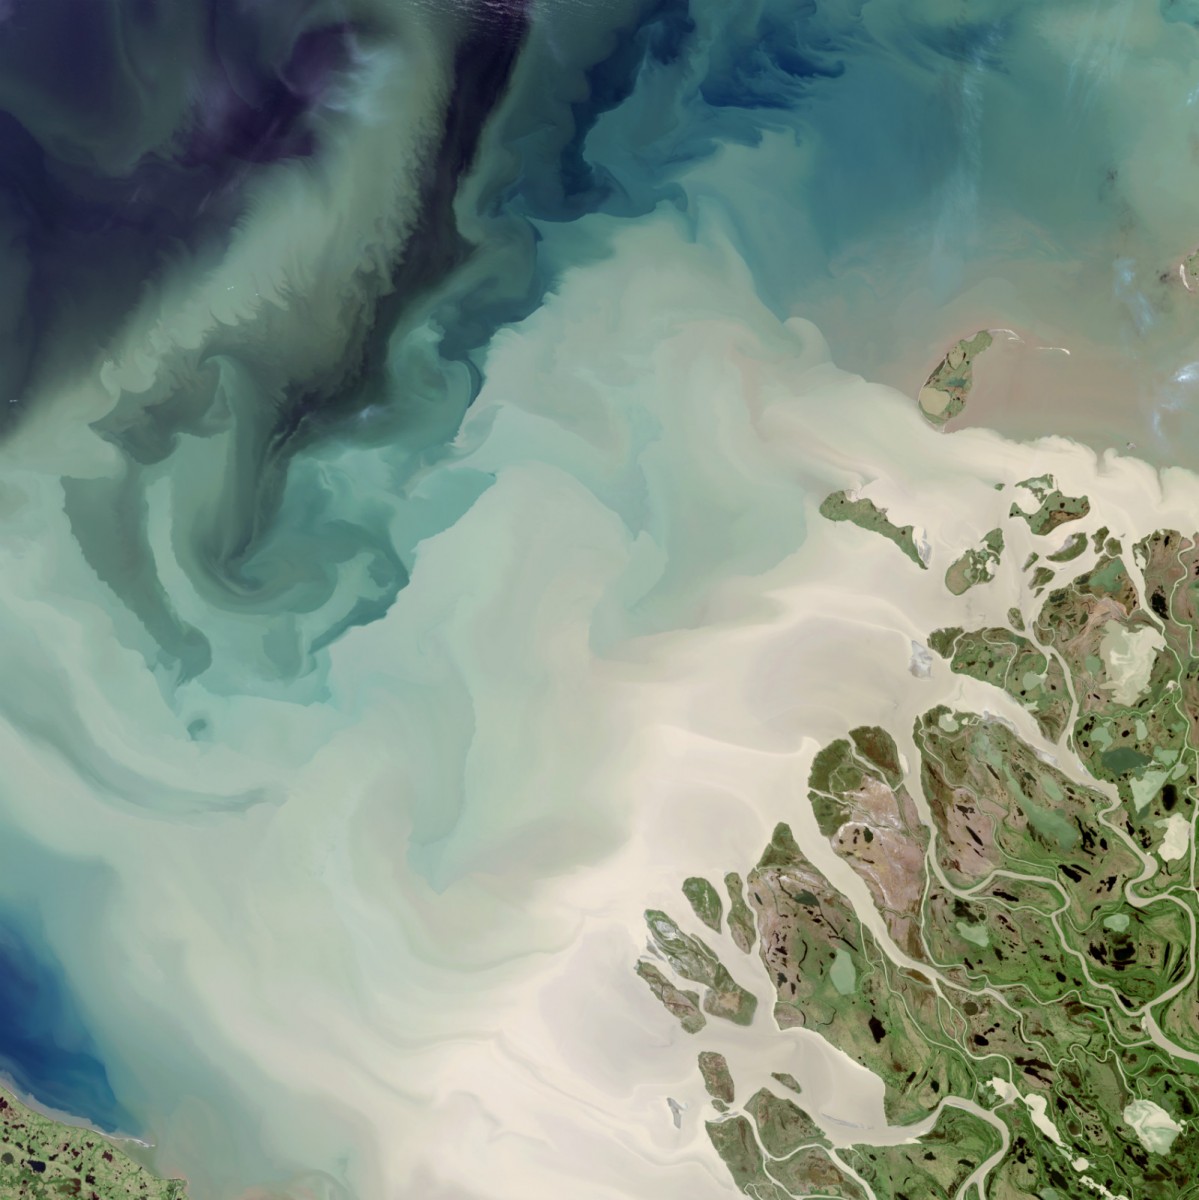 A satellite image looking down on where a white river flows out of a green delta to swirl and mix with a blue bay.